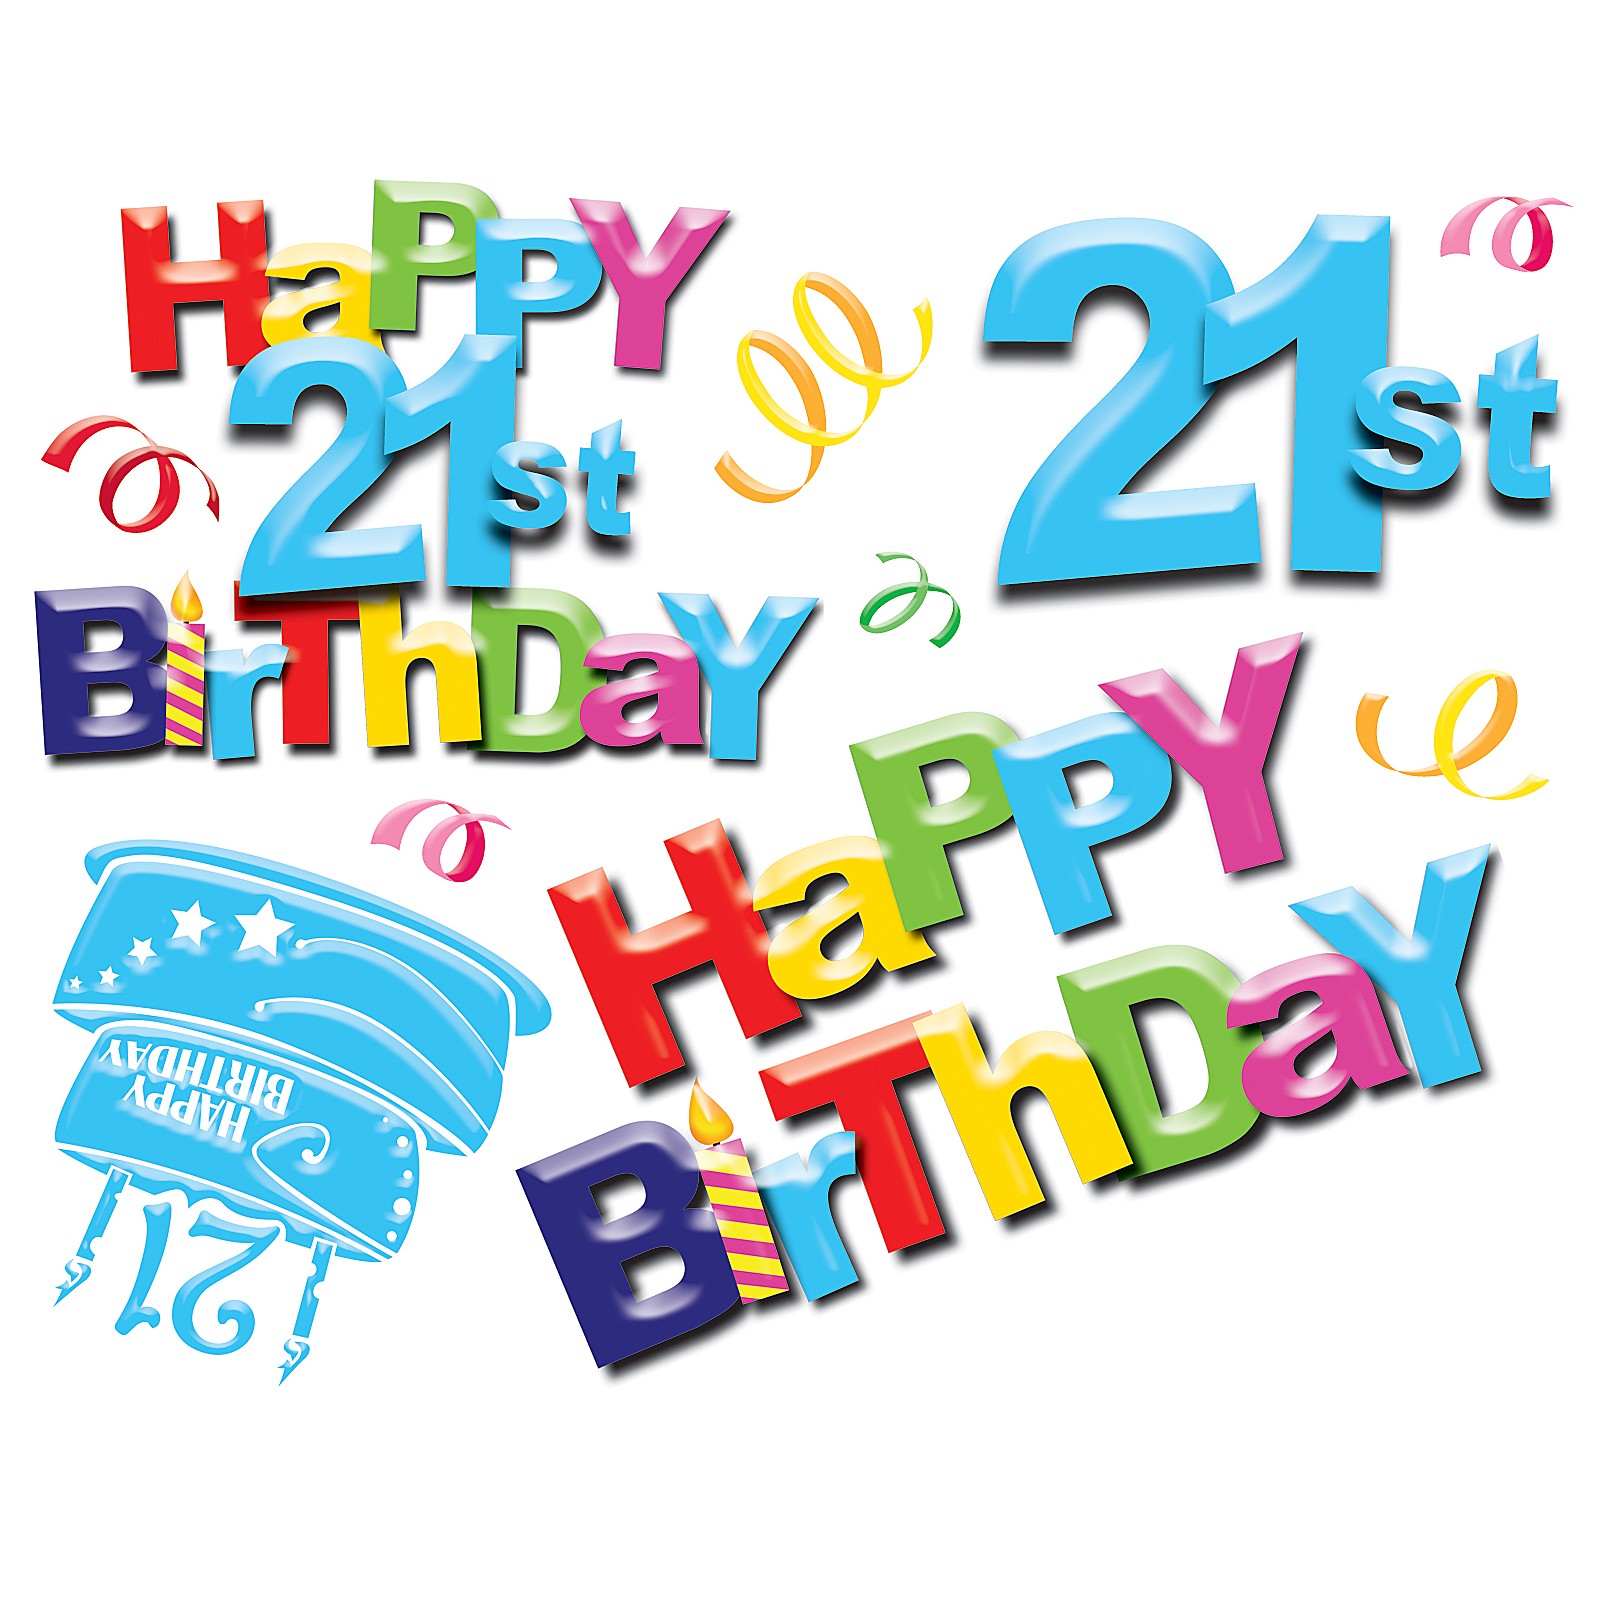 Clip Arts Related To : 123 greetings happy birthday. view all Happy 21st Bi...